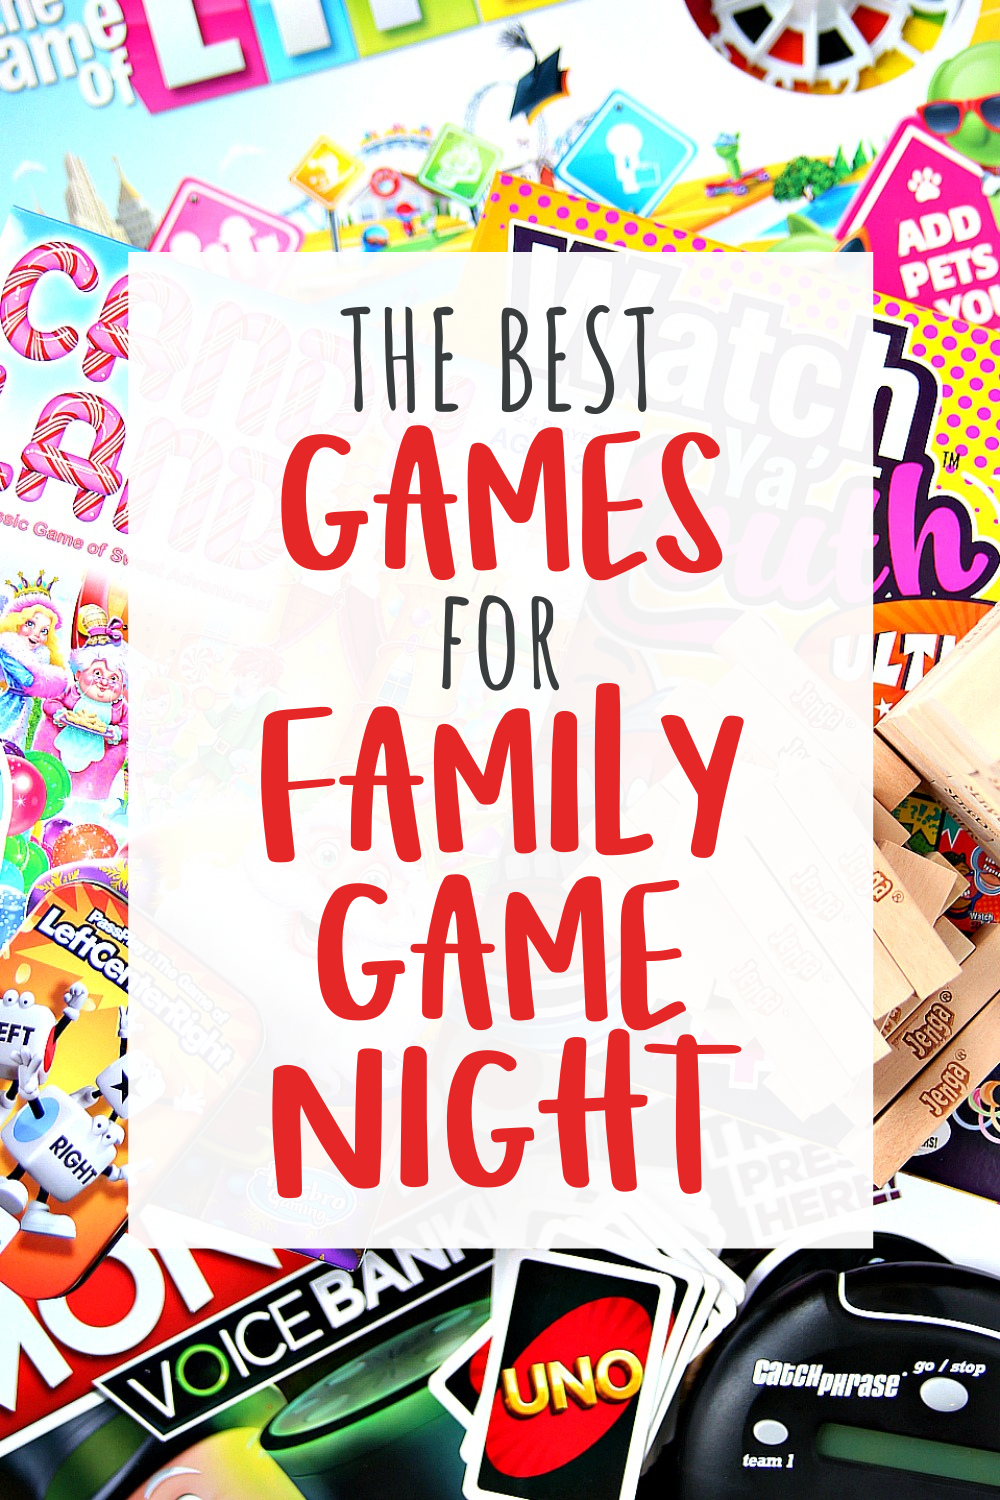 The Best Games for Family Game Night